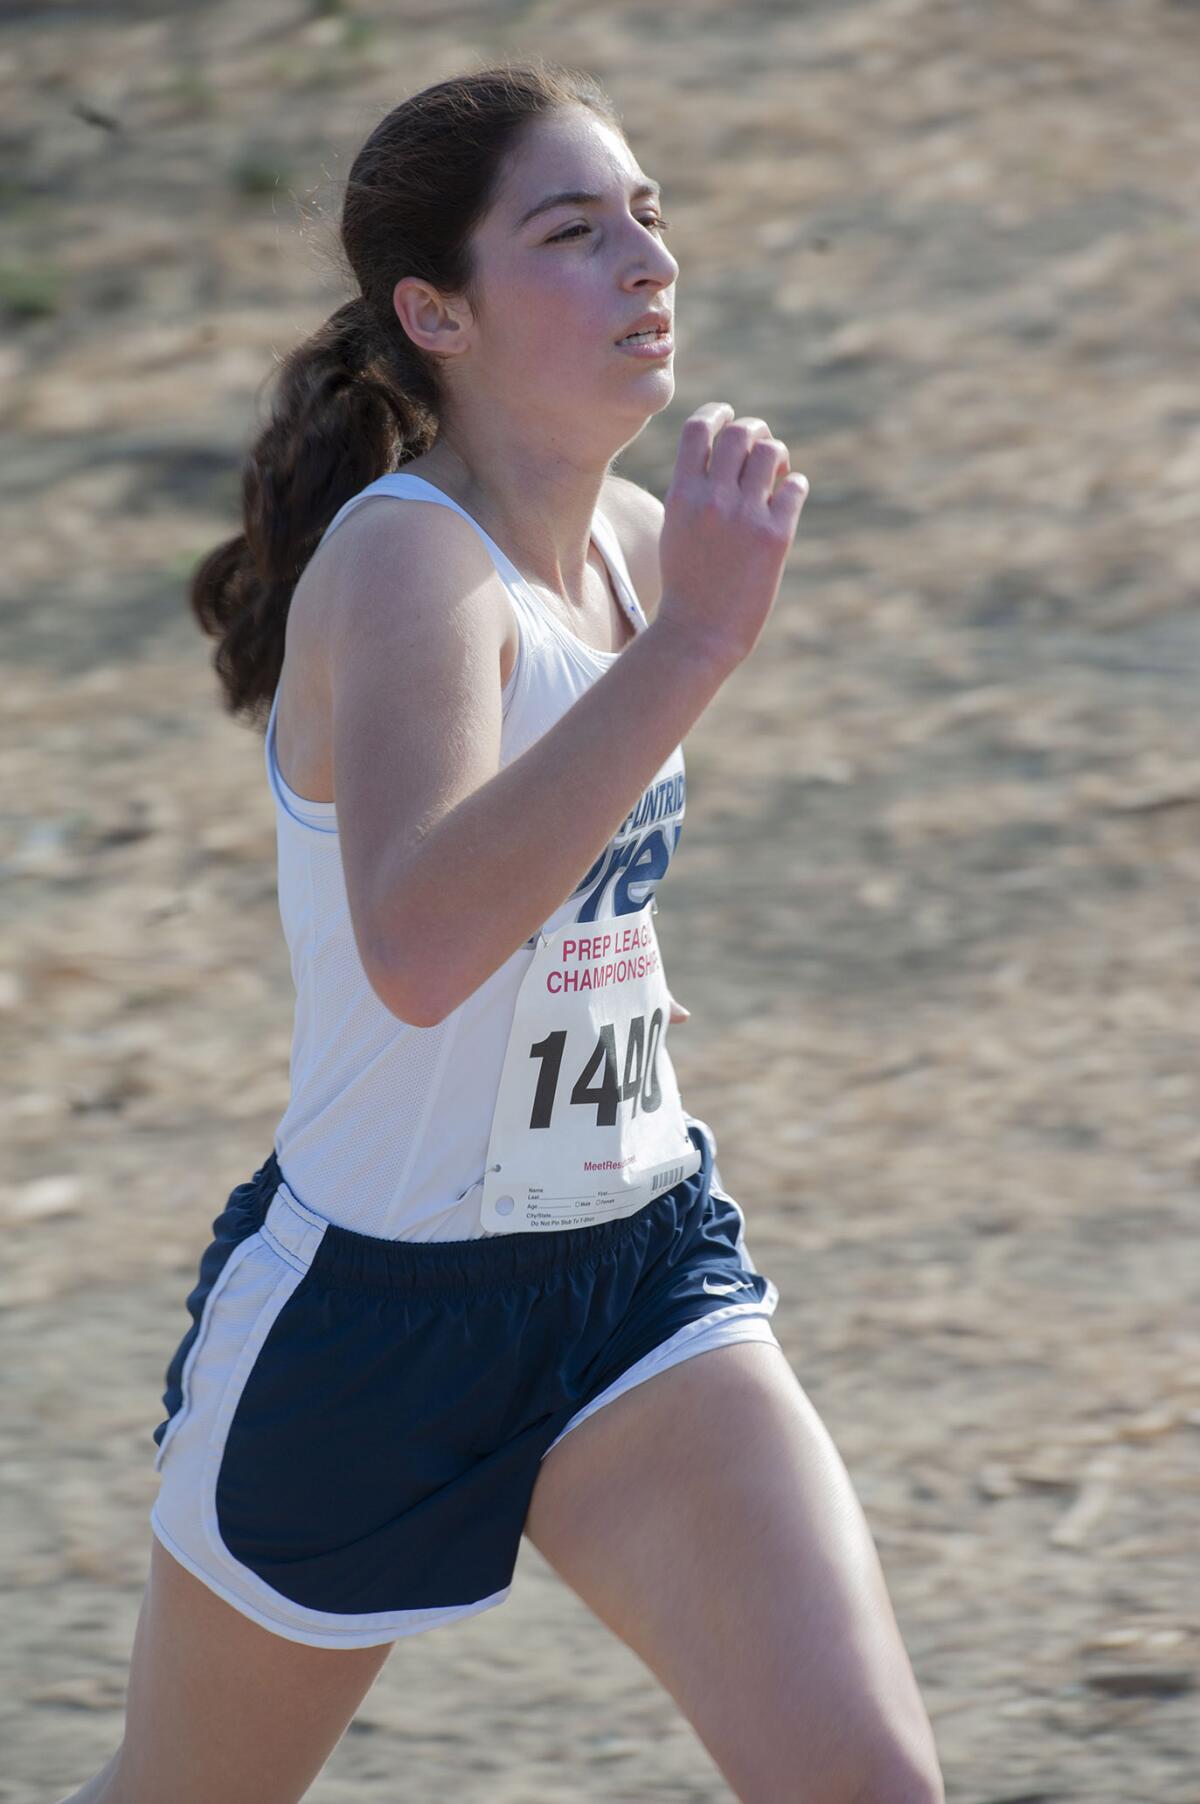 Flintridge Prep's Nicole Mirzaian approaches the finish line of the girls varsity Prep League Cross Country finals at Pierce College Saturday. (Photo by Miguel Vasconcellos)